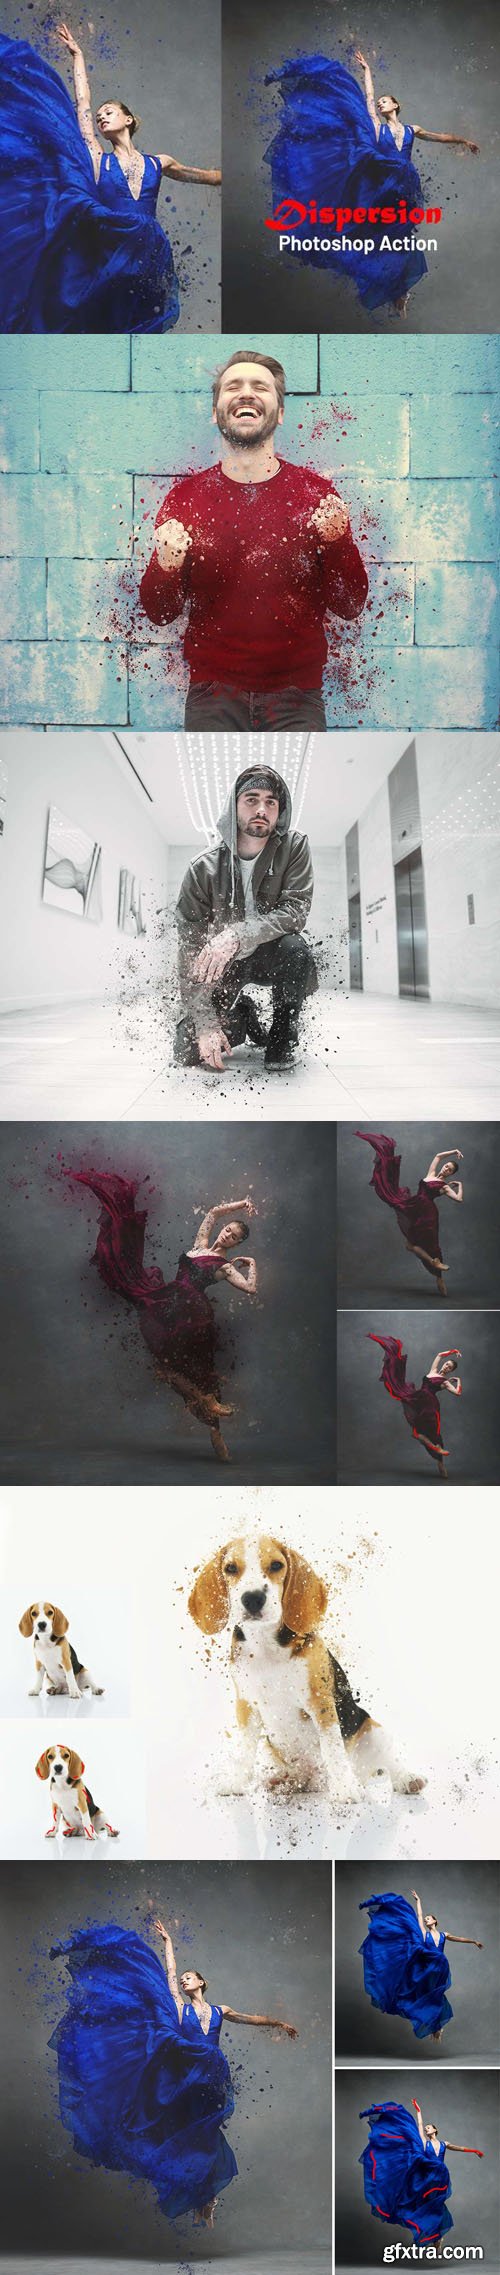 Dispersion Actions & Brushes for Photoshop